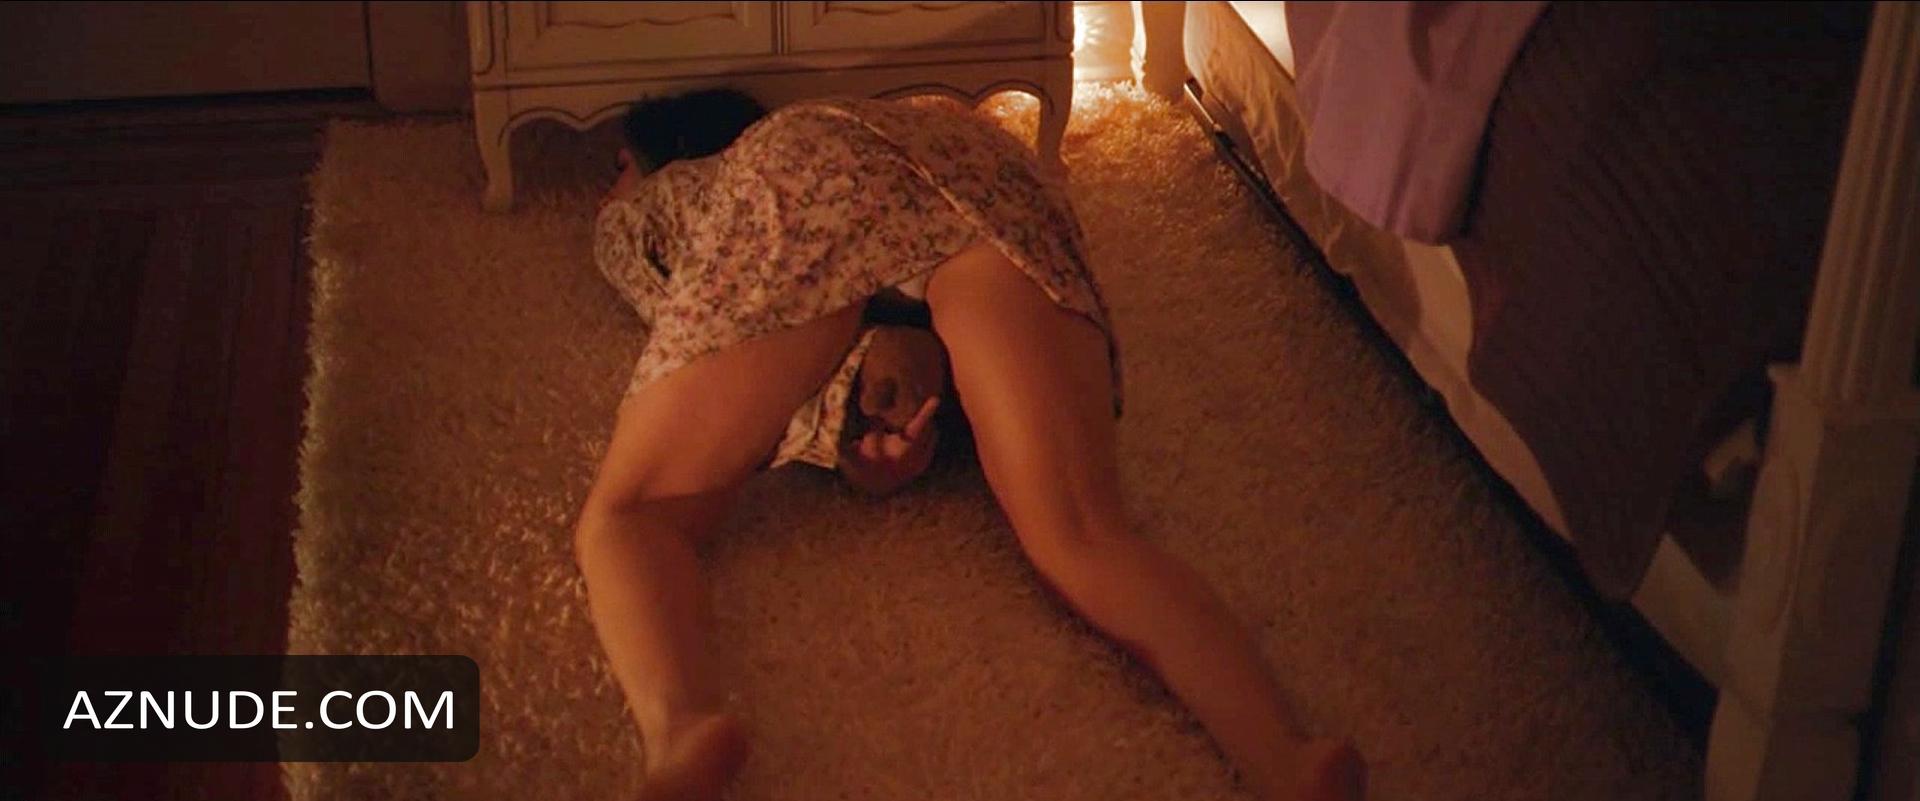 Browse Celebrity Teddy Bear Images Page 1 Aznude